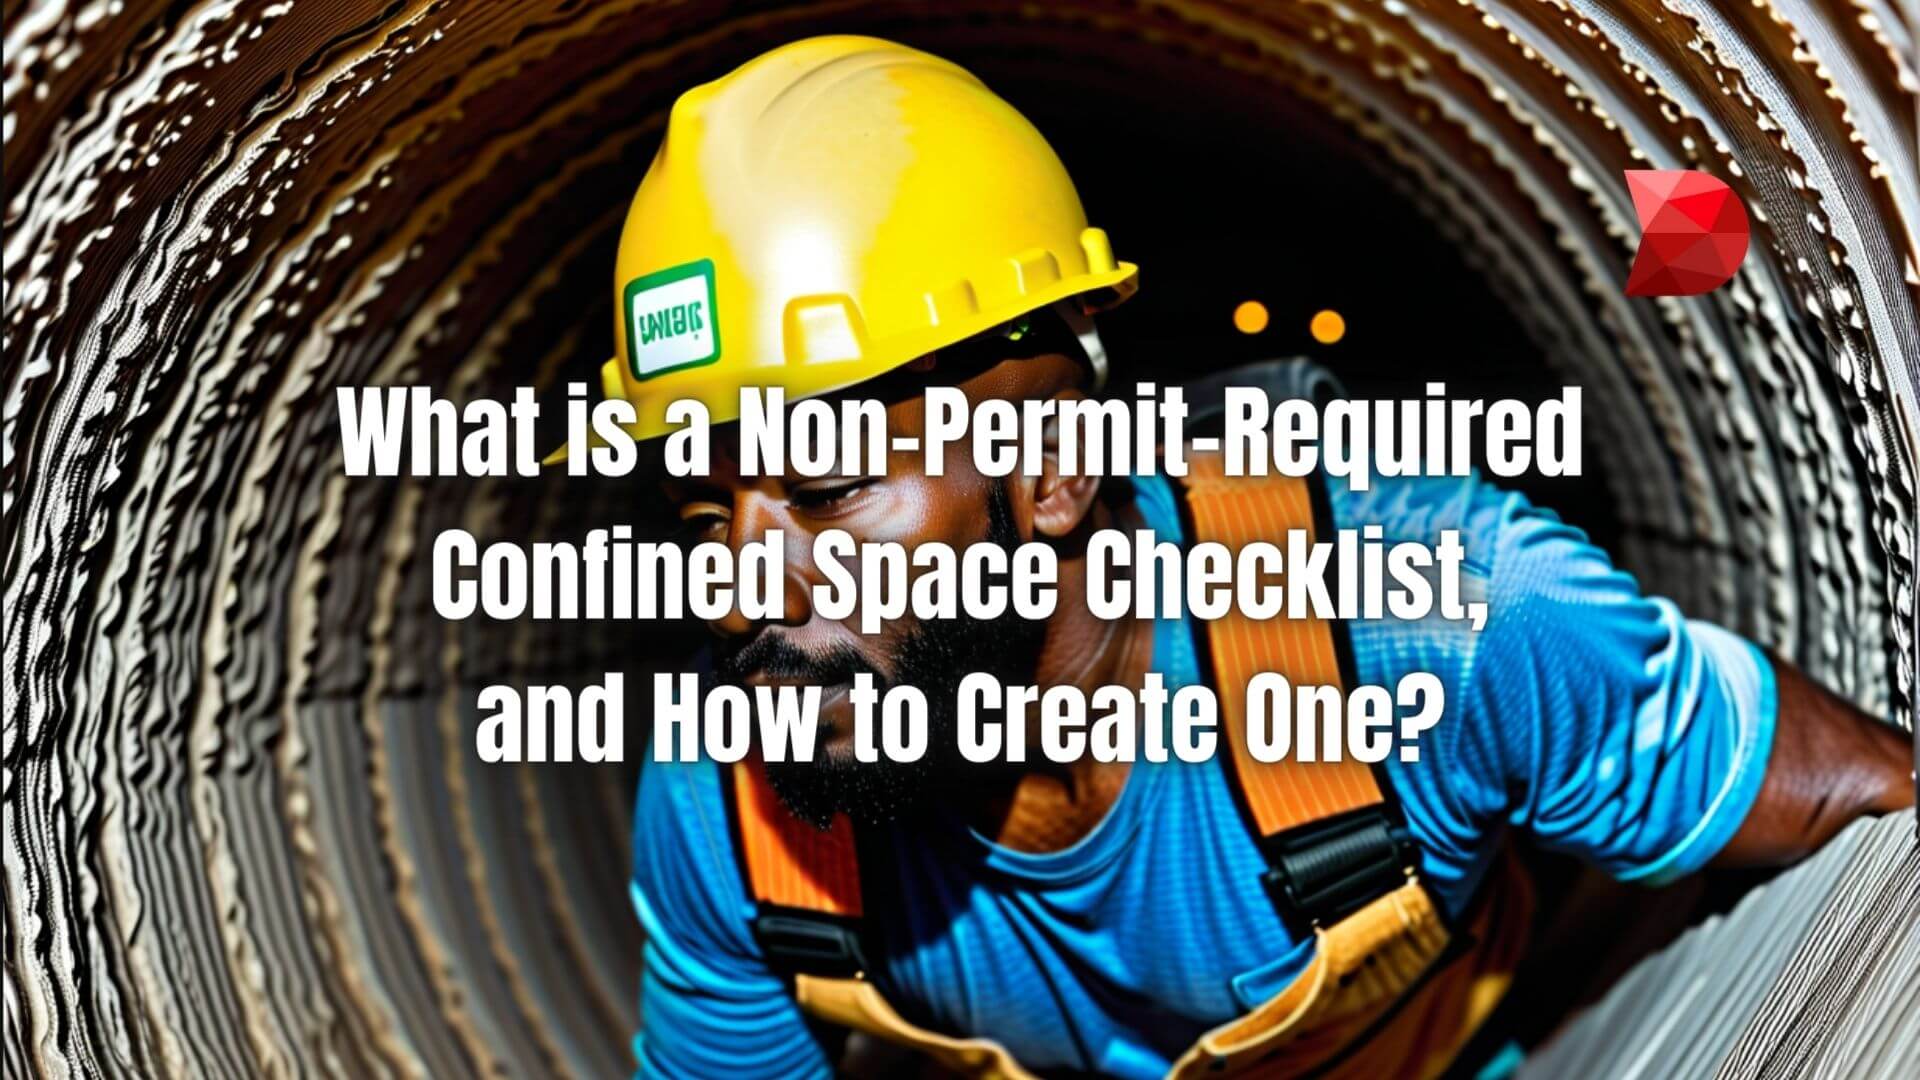 A non-permit-required confined space checklist is used to assess potential risks in non-permit-required confined spaces. Learn more!